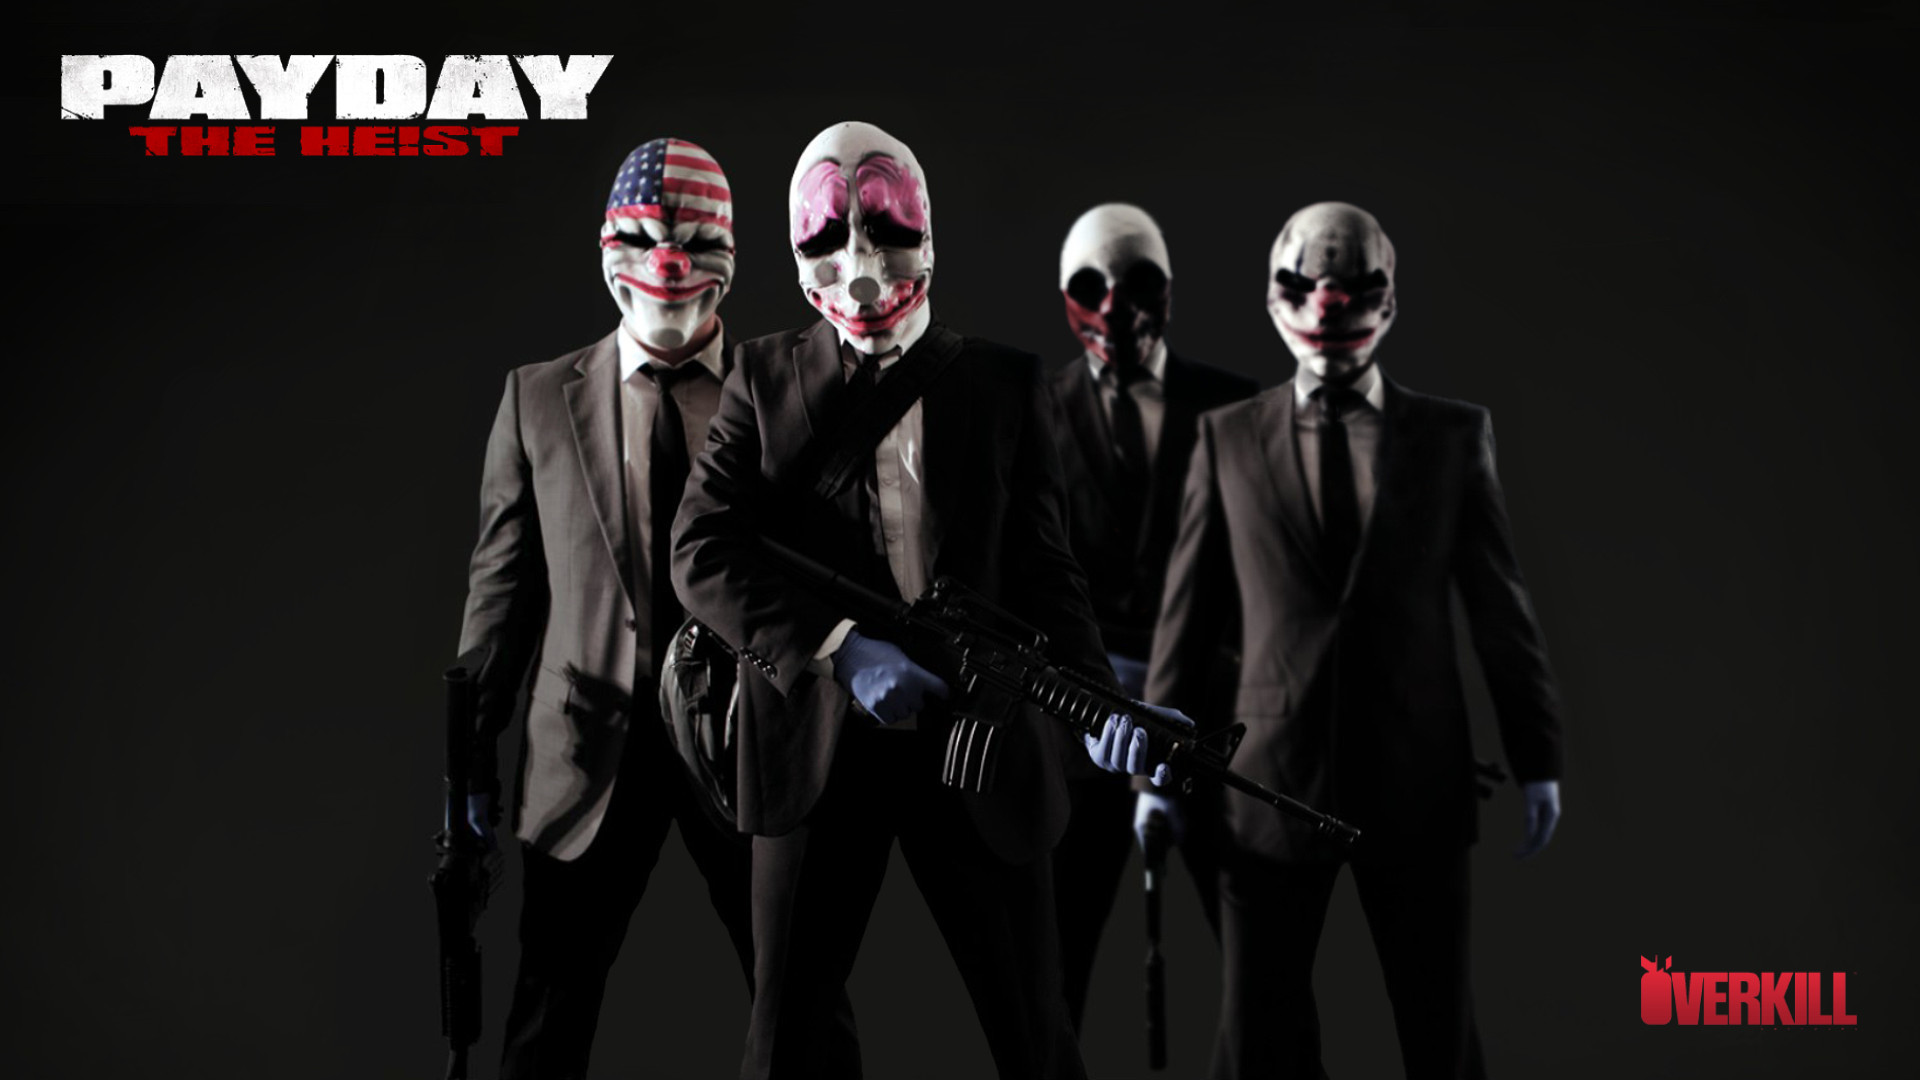 Dead payday 2 фото 68